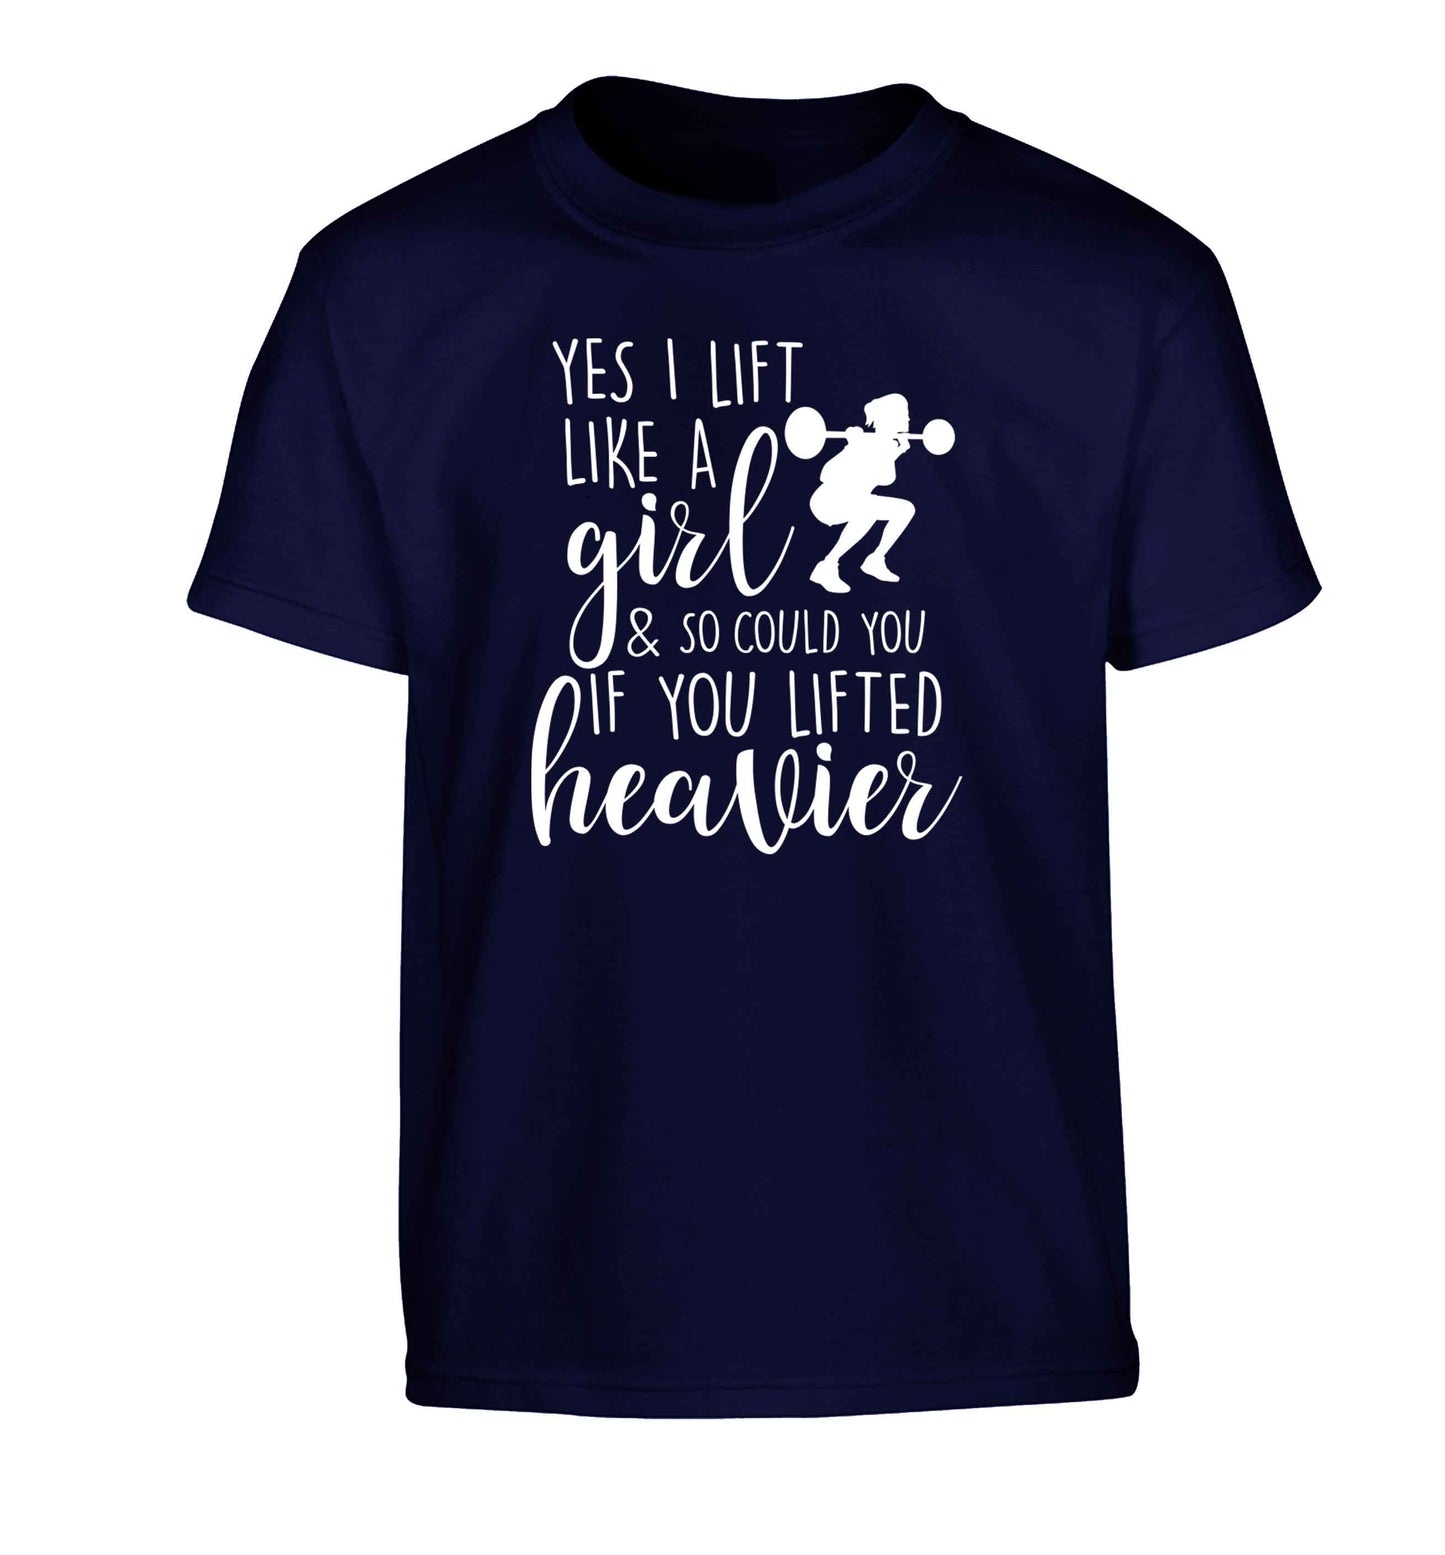 Yes I lift like a girl and so could you if you lifted heavier Children's navy Tshirt 12-13 Years